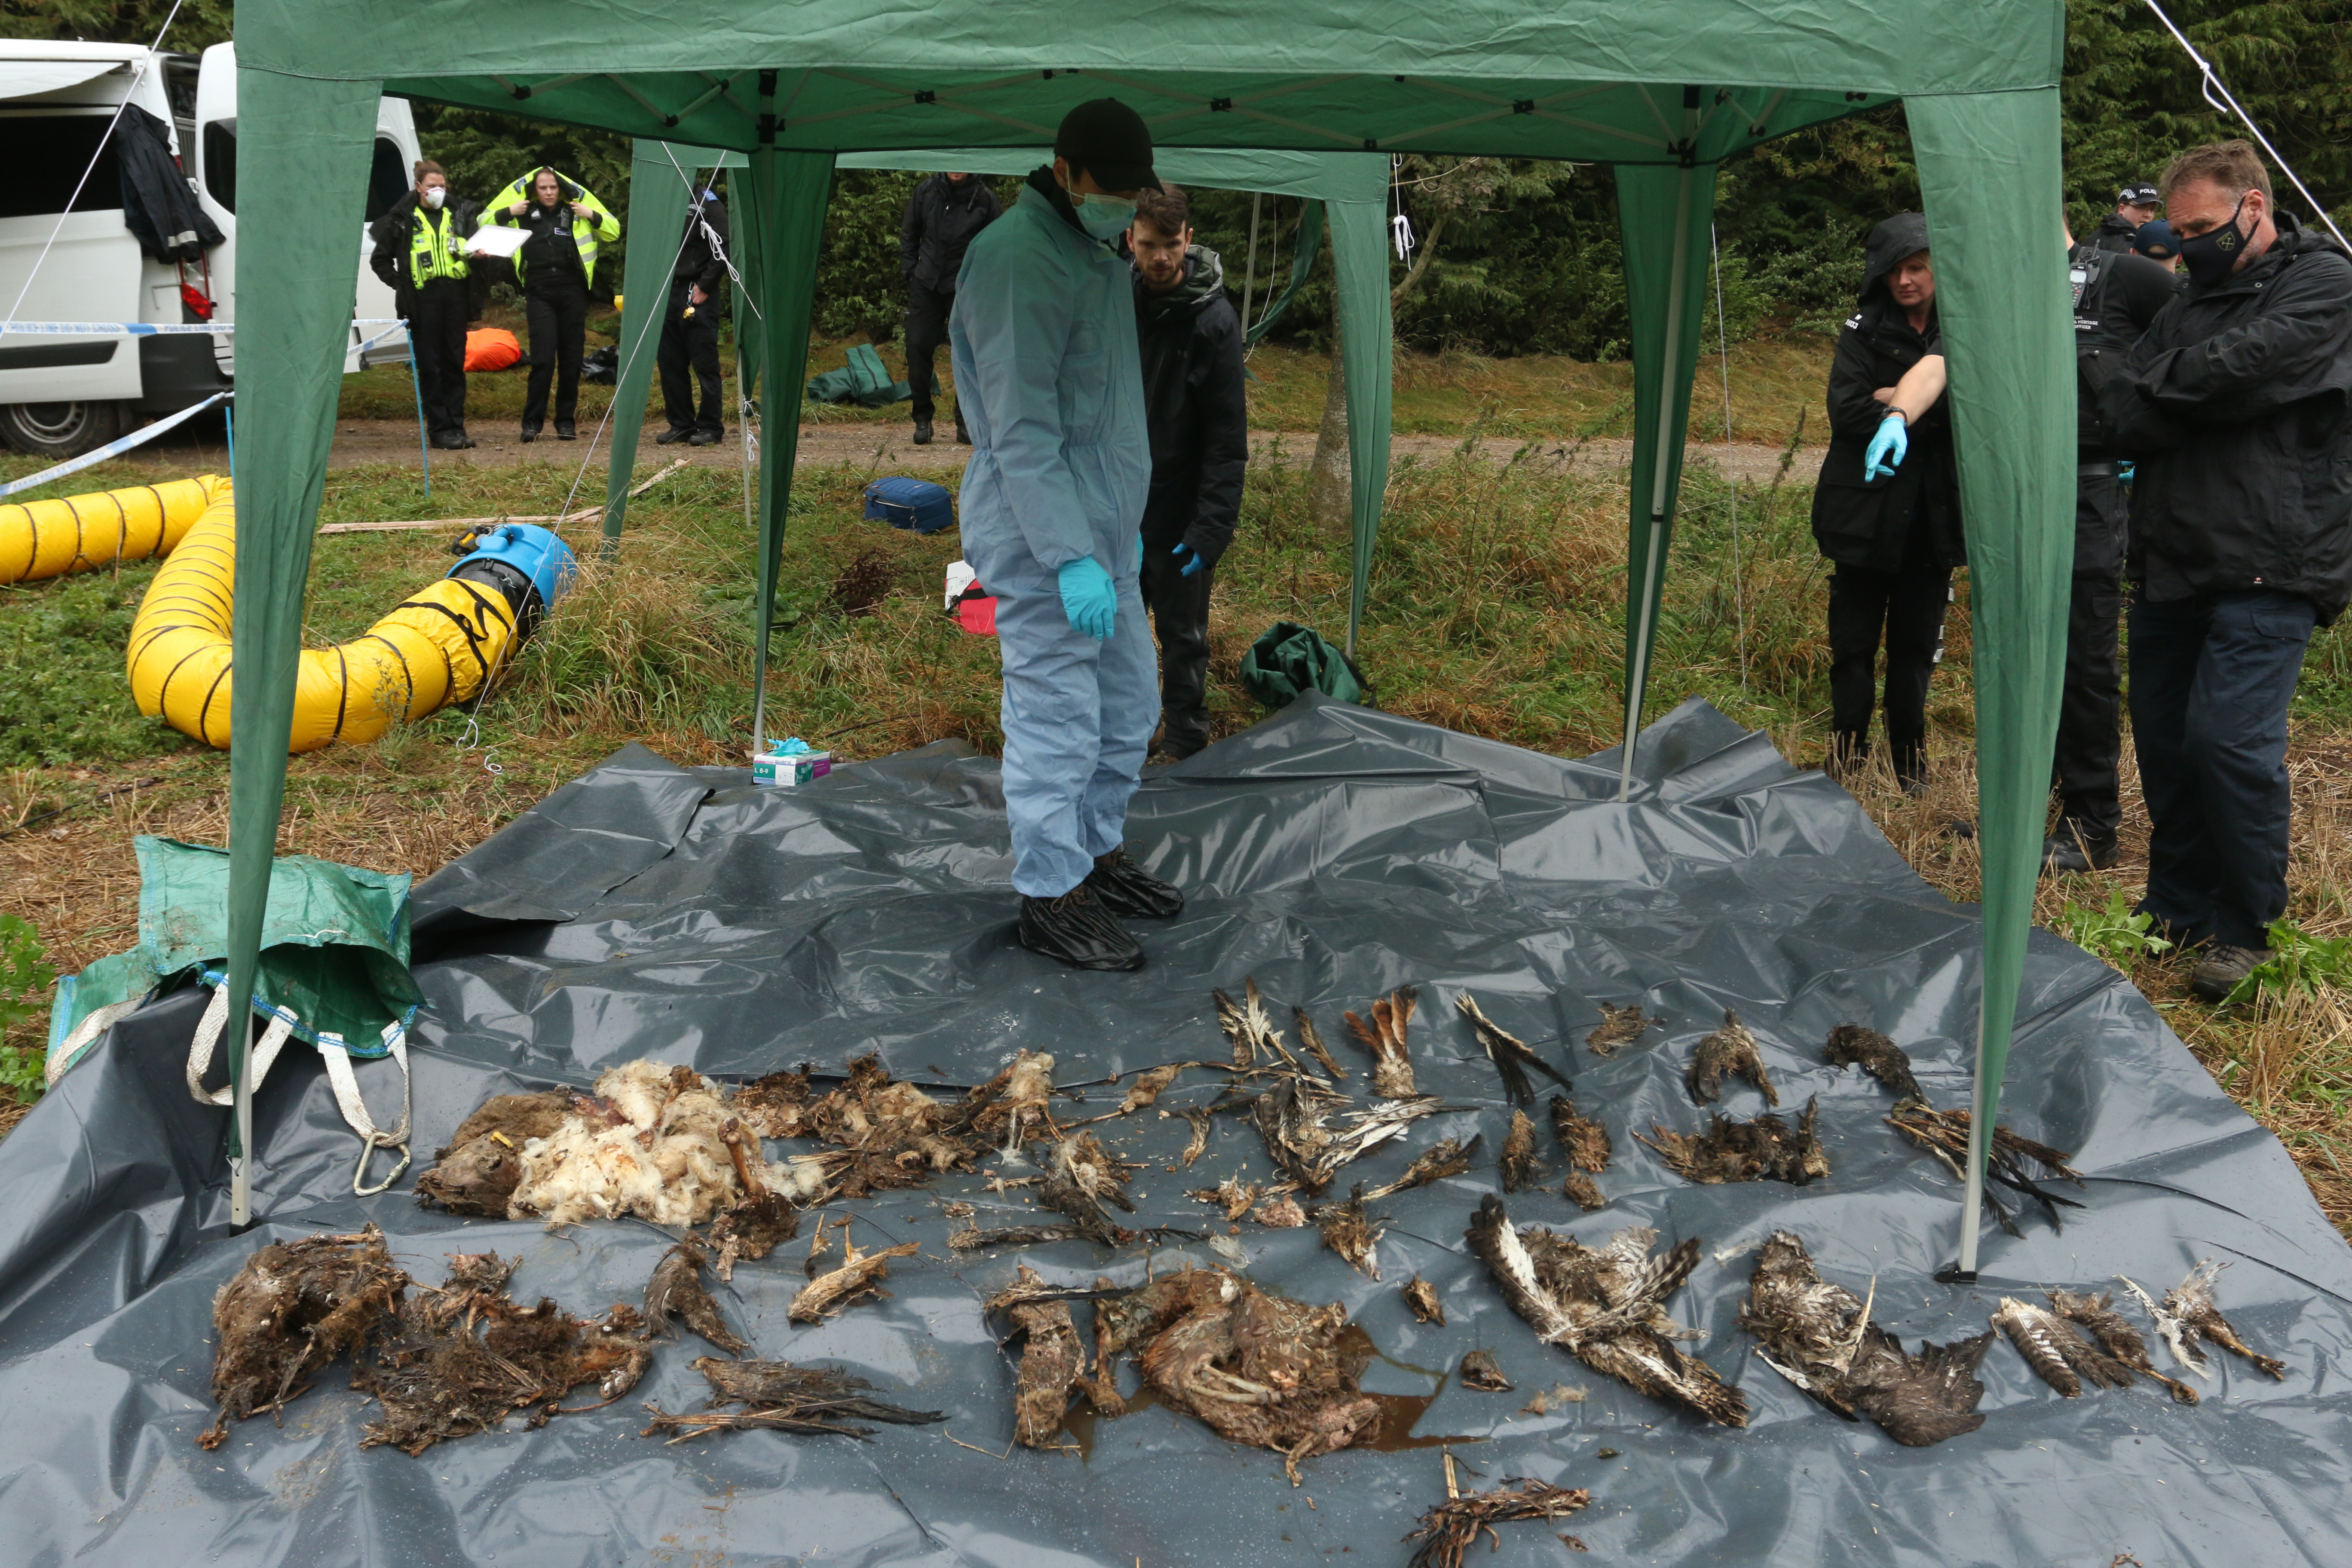 The remains of birds of prey found down a well laid out on a tarpaulin